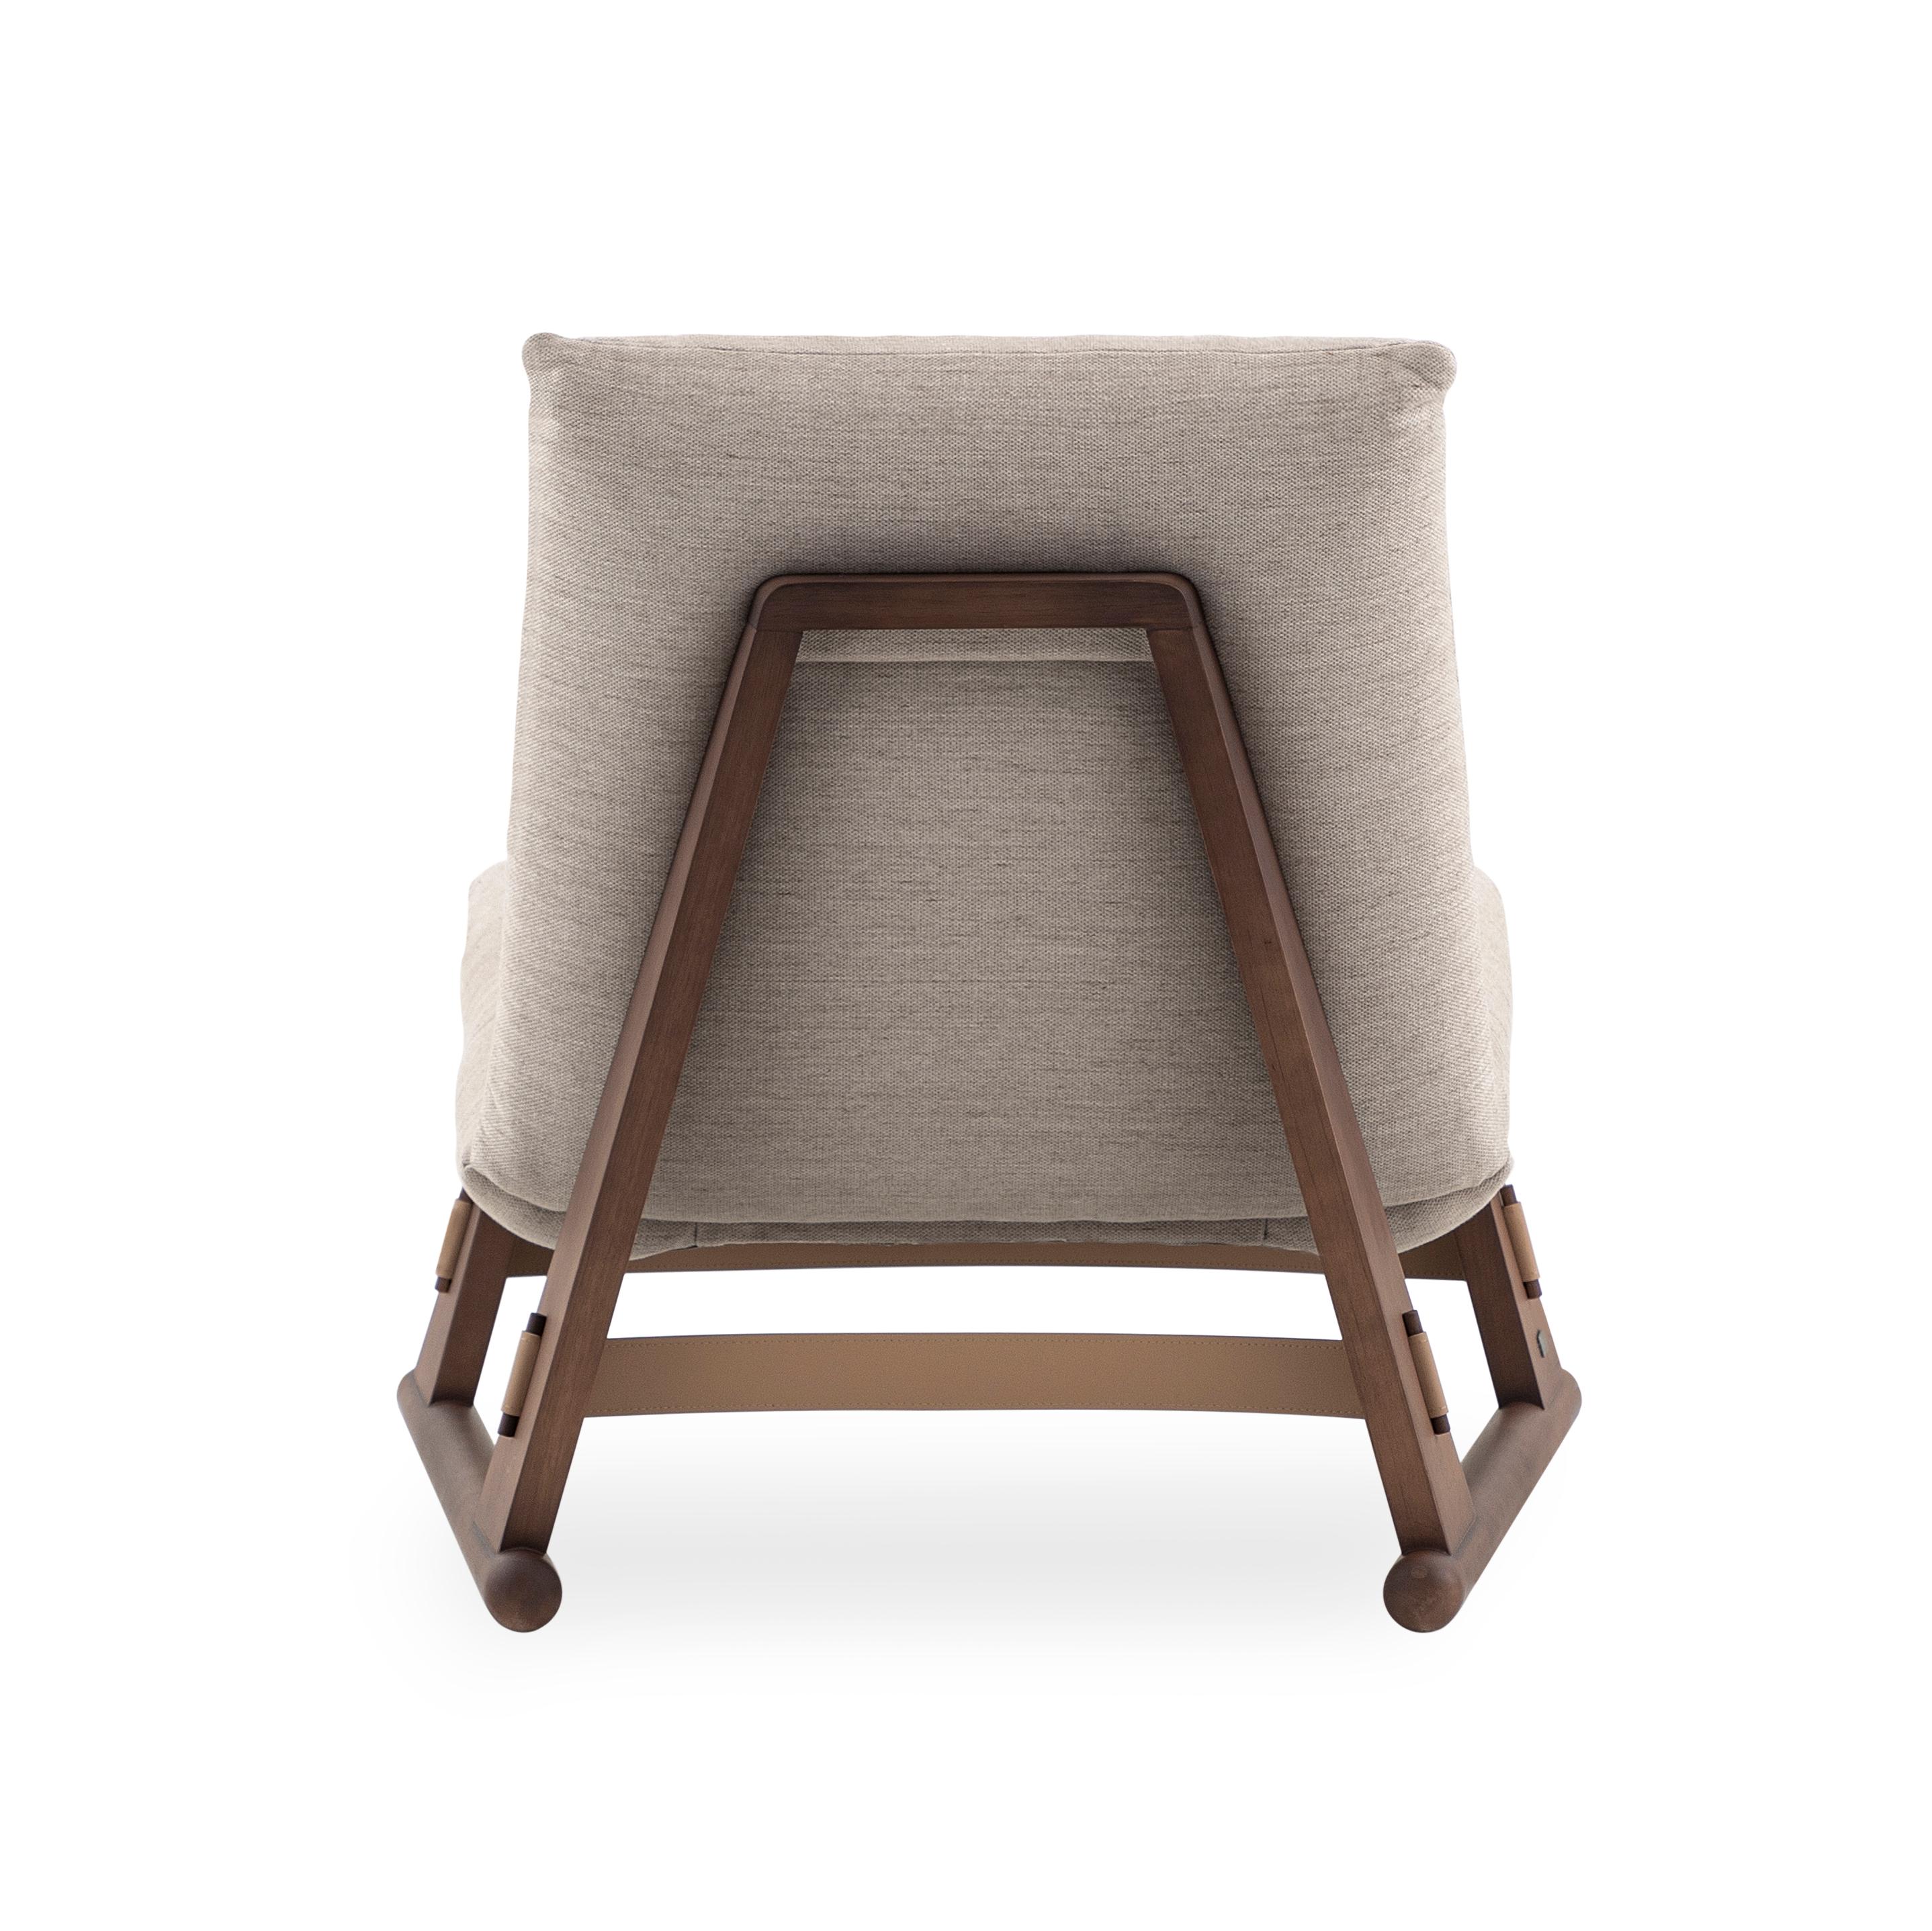 Contemporary Maia Chair in Walnut Wood Finish Frame and Light Beige Fabric In New Condition For Sale In Miami, FL